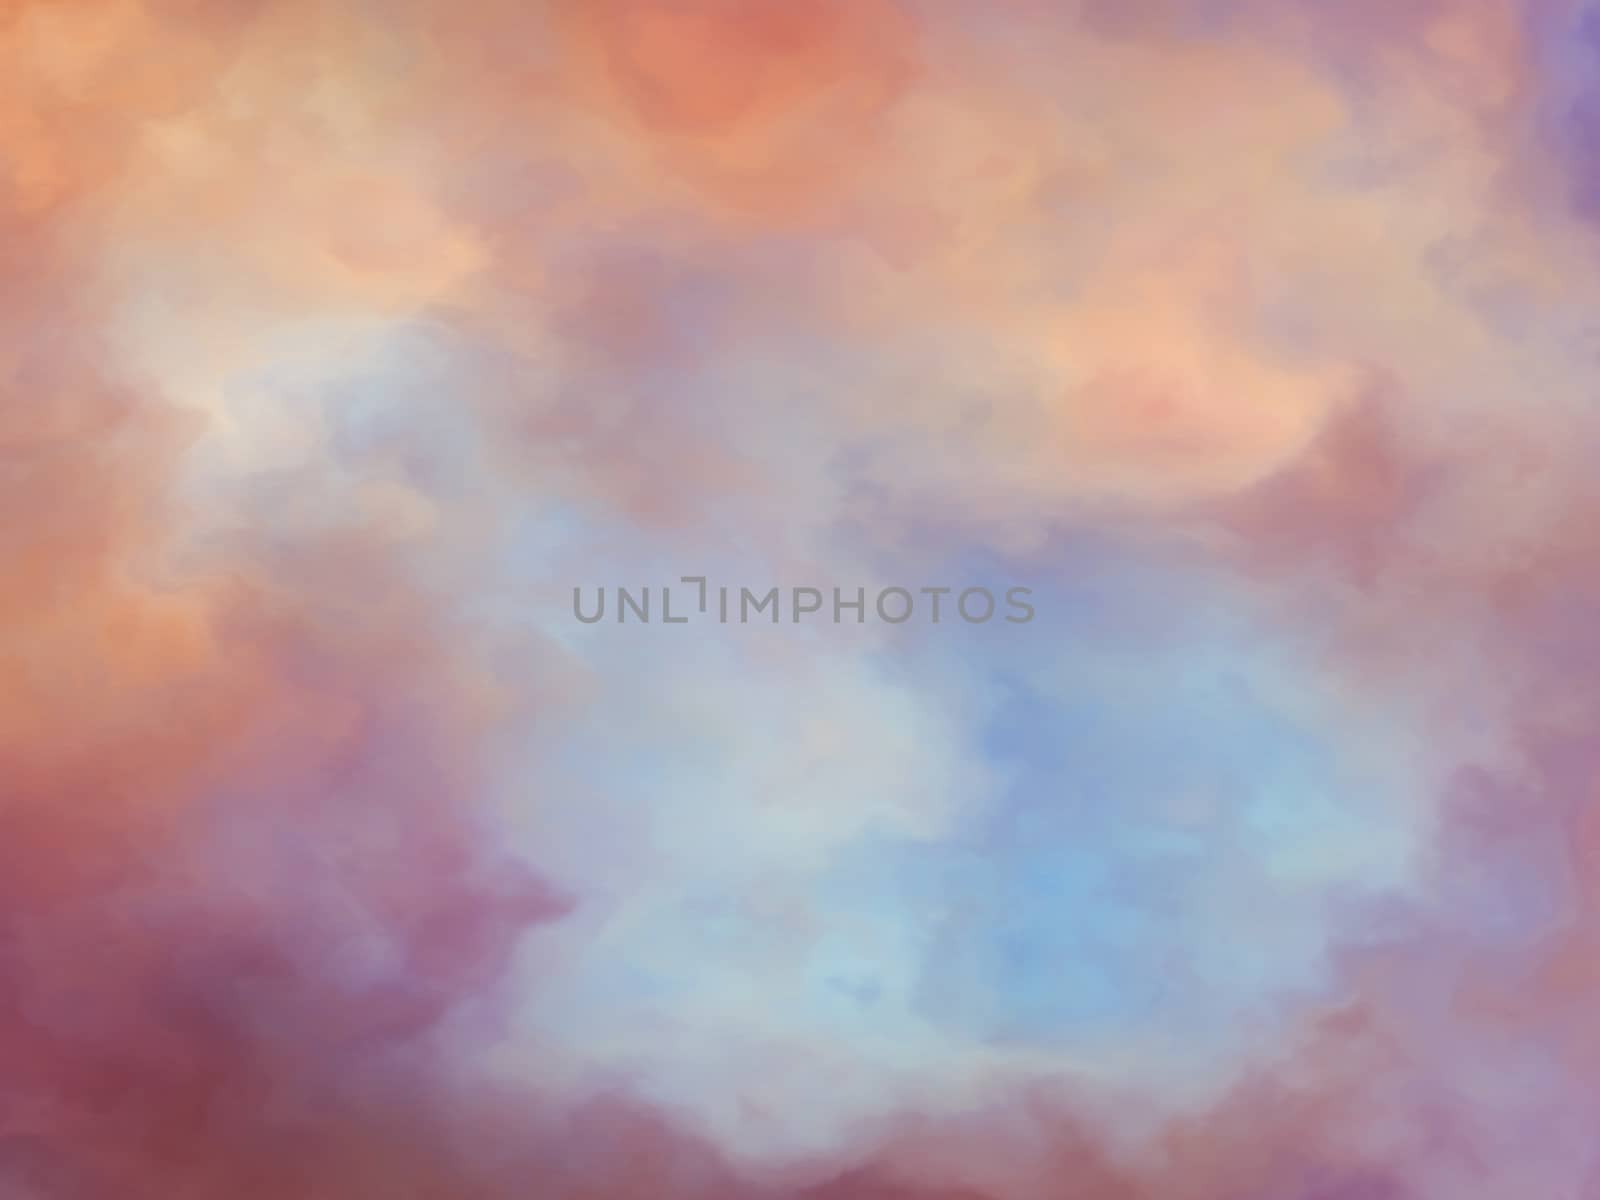 A frame of warm, golden-hued fantasy clouds at sunrise, open to reveal lighter, whiter clouds and bluer skies